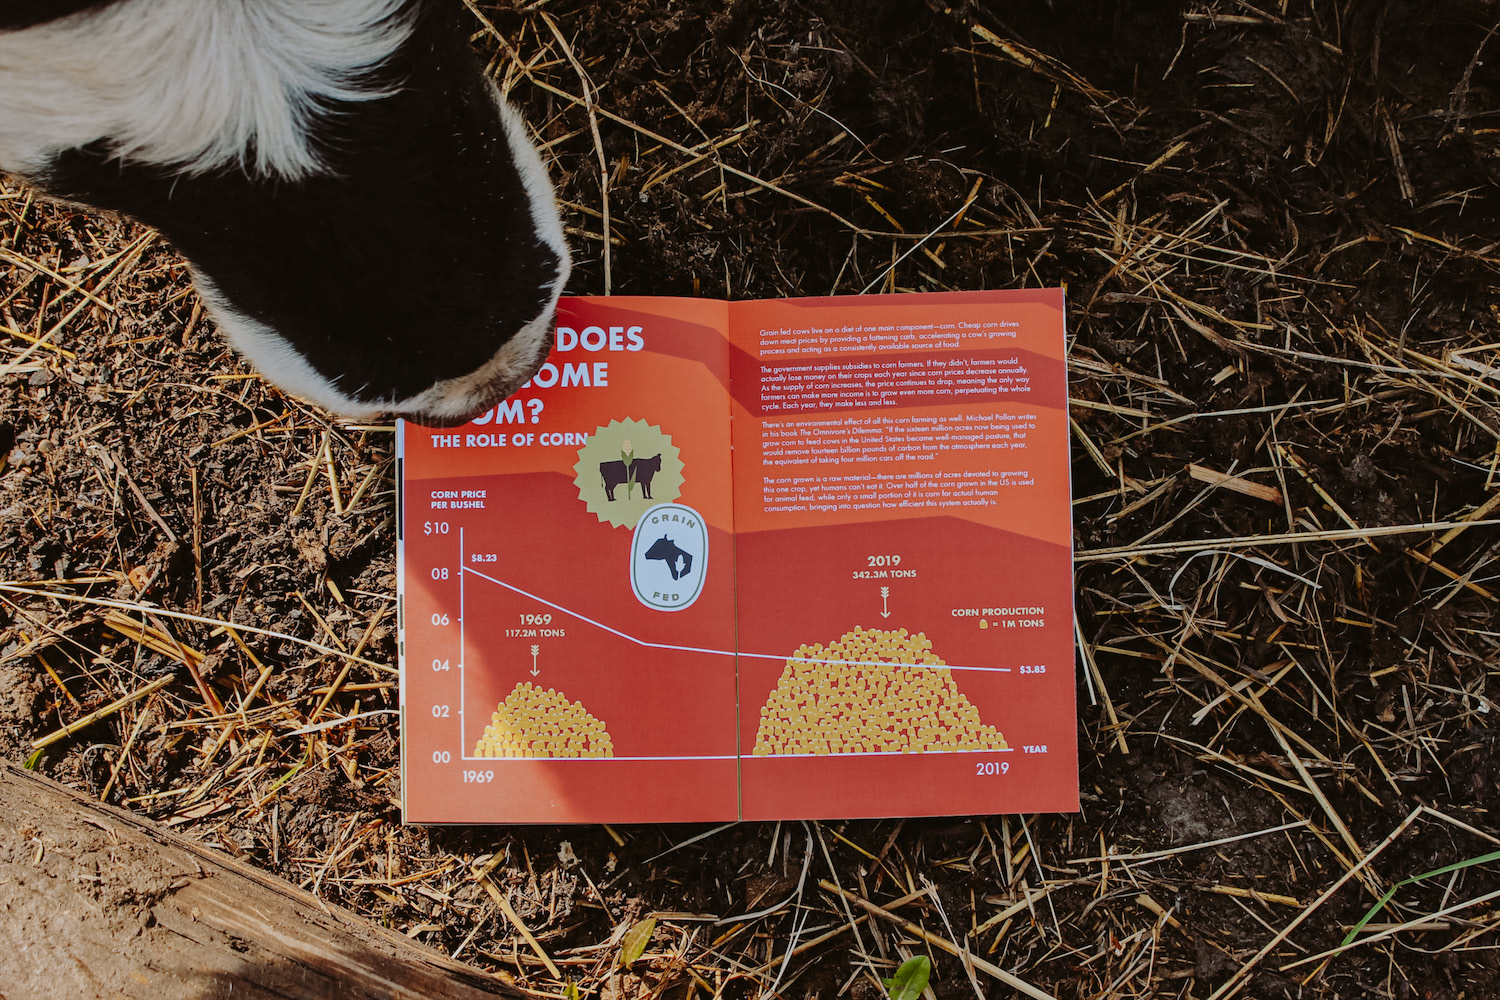 A book spread open on some hay with a cow sniffing it